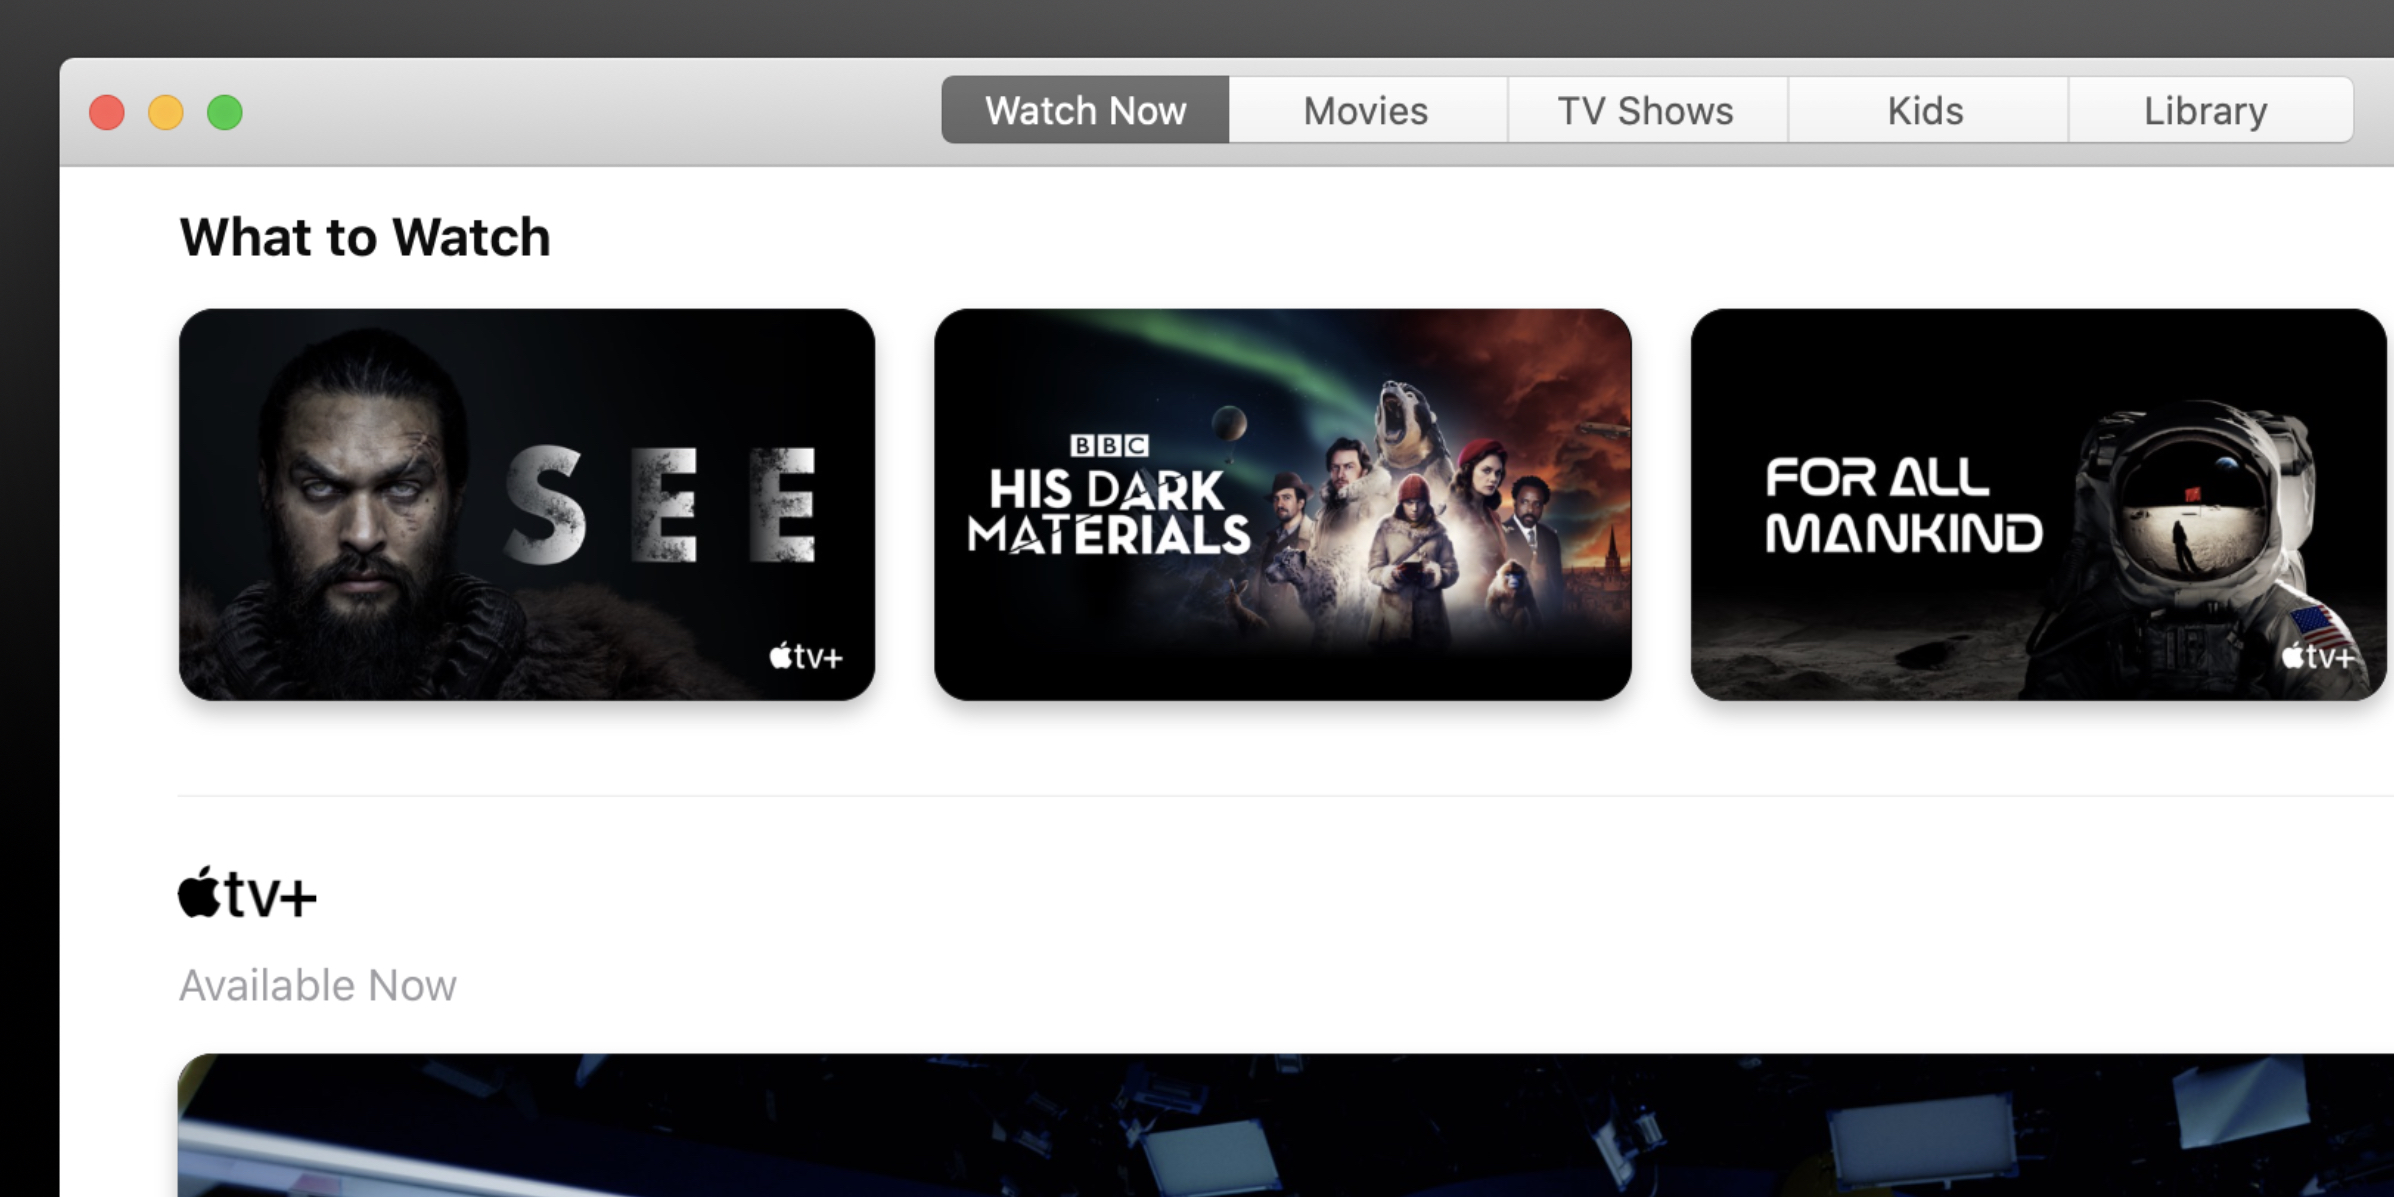 is there going to be apple tv app for mac